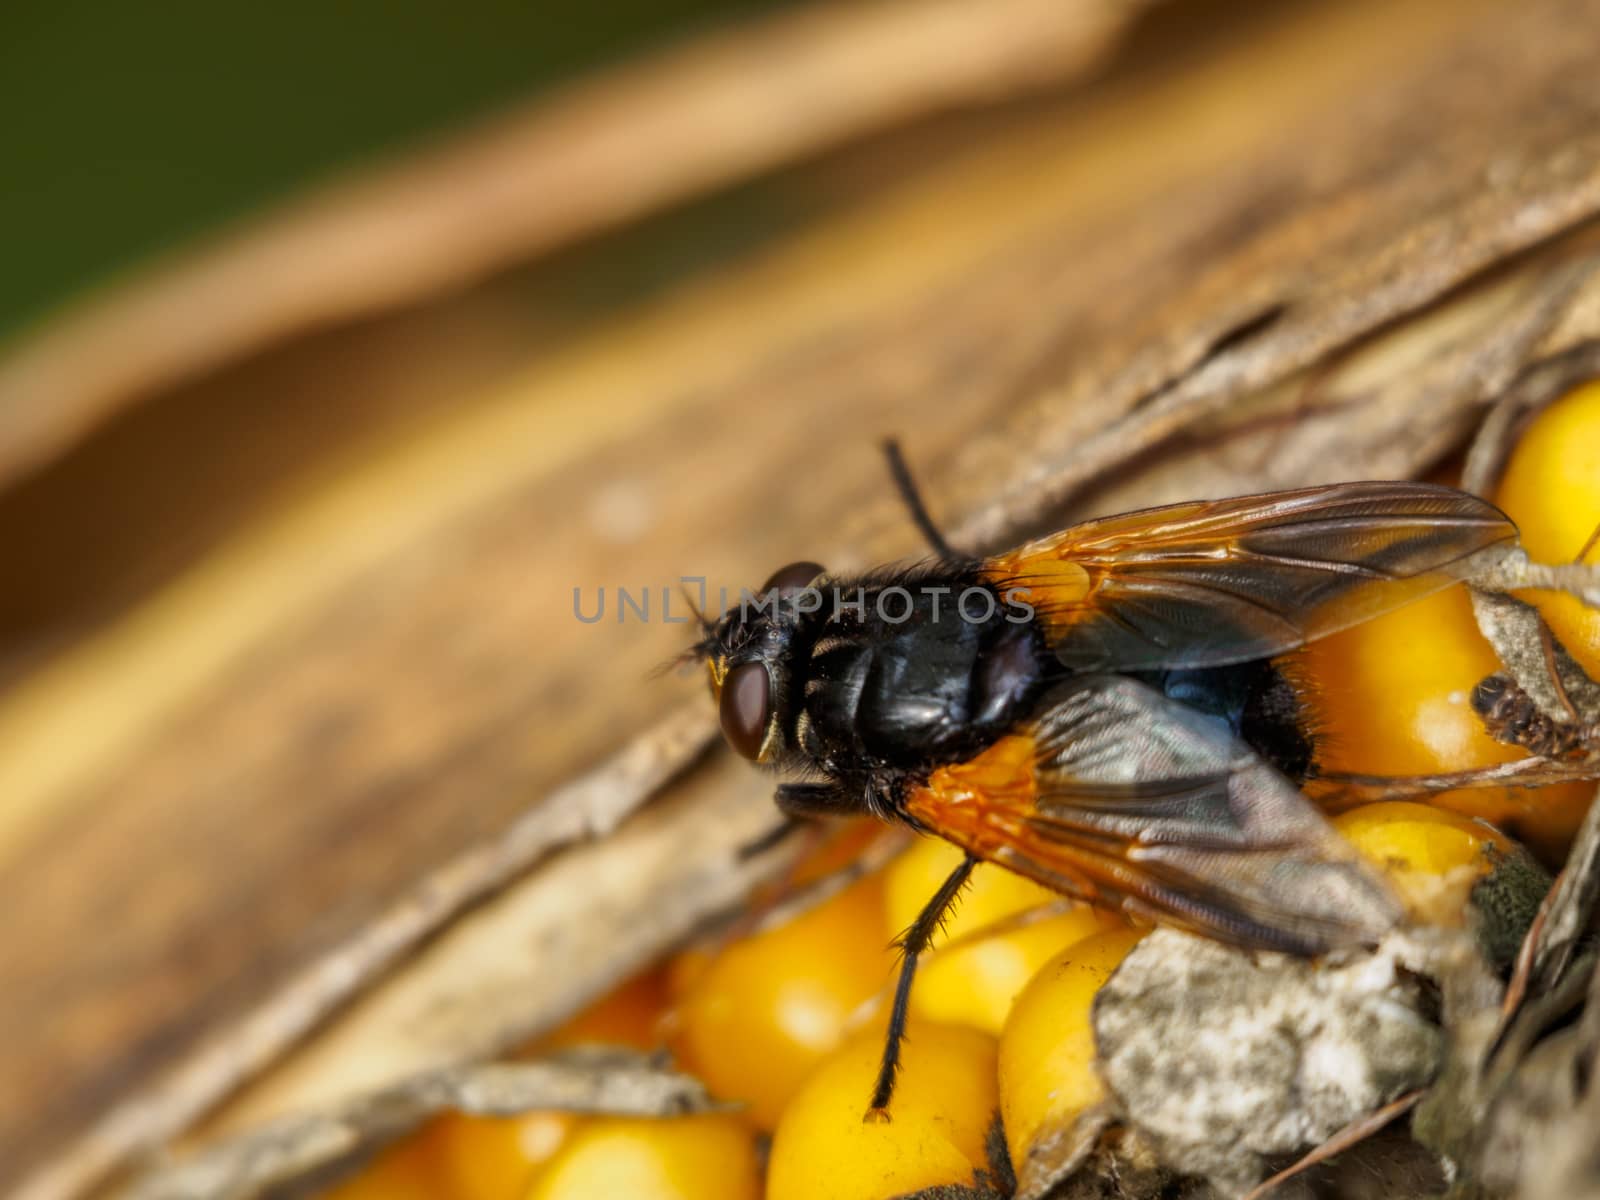 Closeup of a fly resting on maize